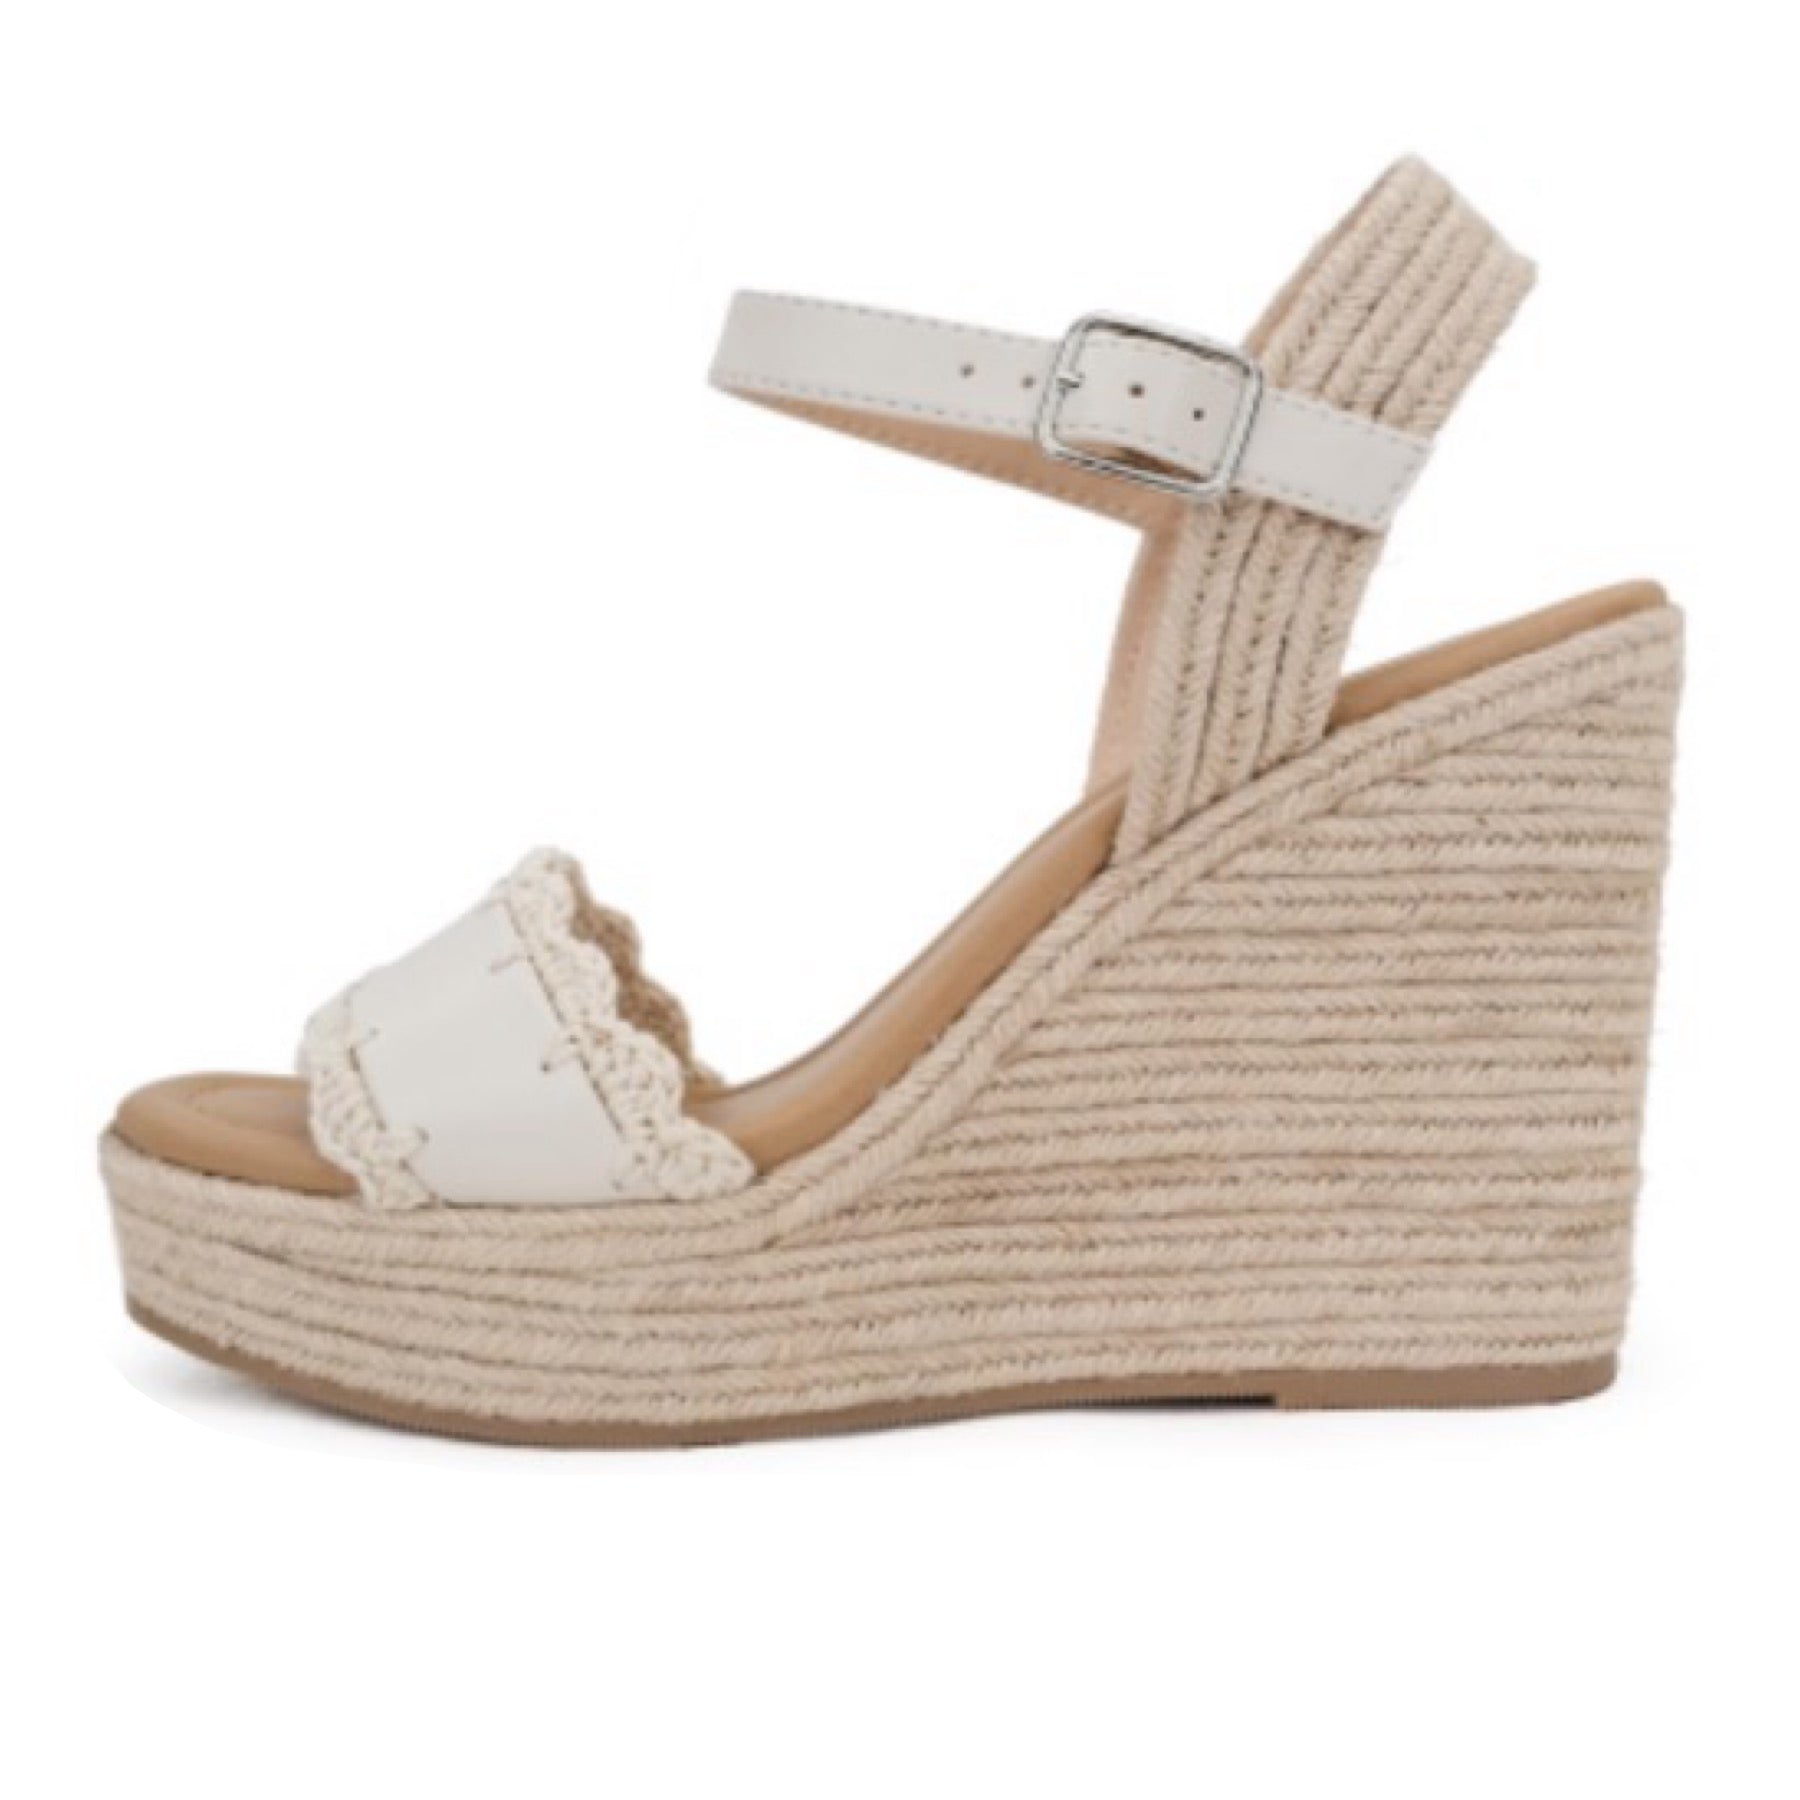 Scallop Lace Open Toe Wedge Sandals in Cream